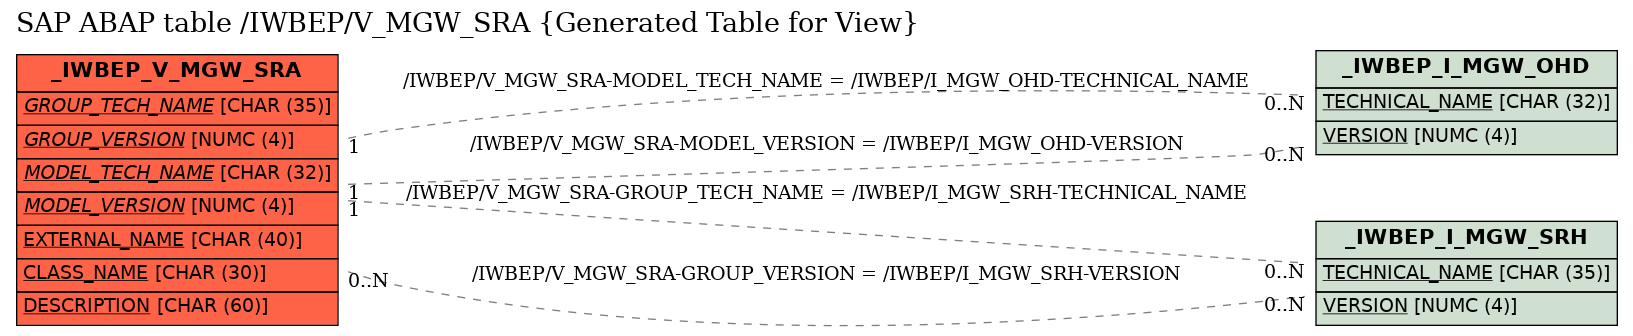 E-R Diagram for table /IWBEP/V_MGW_SRA (Generated Table for View)